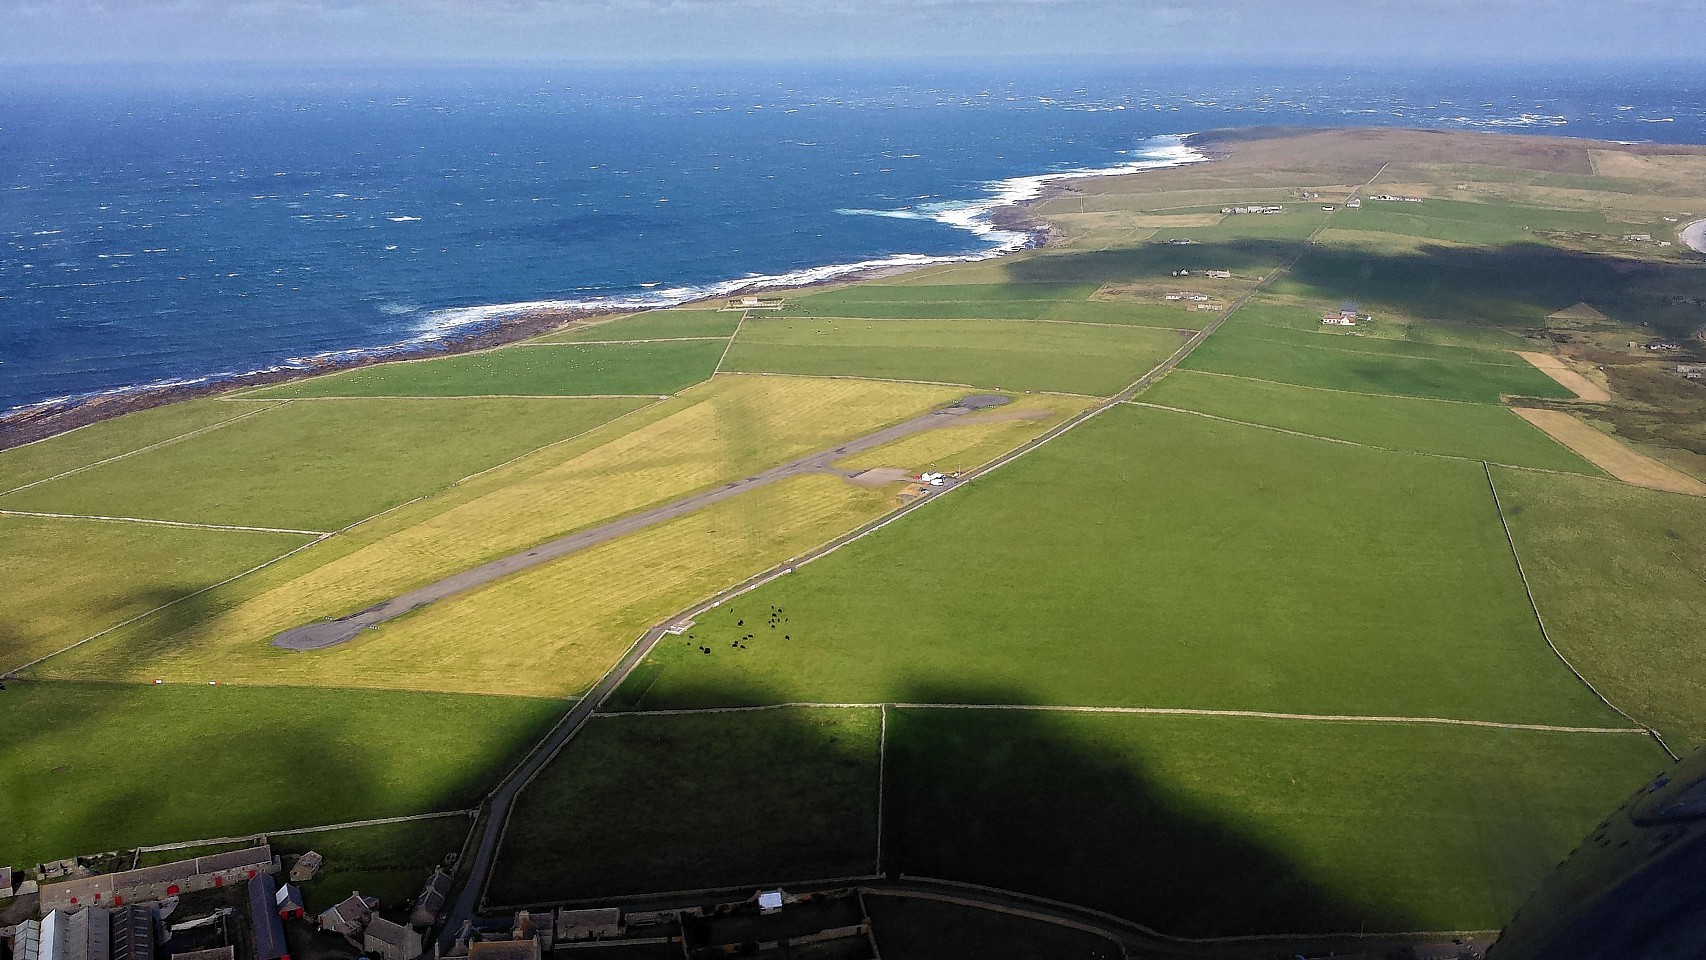 Aerial view of Papa Westray island in the Orkney islands